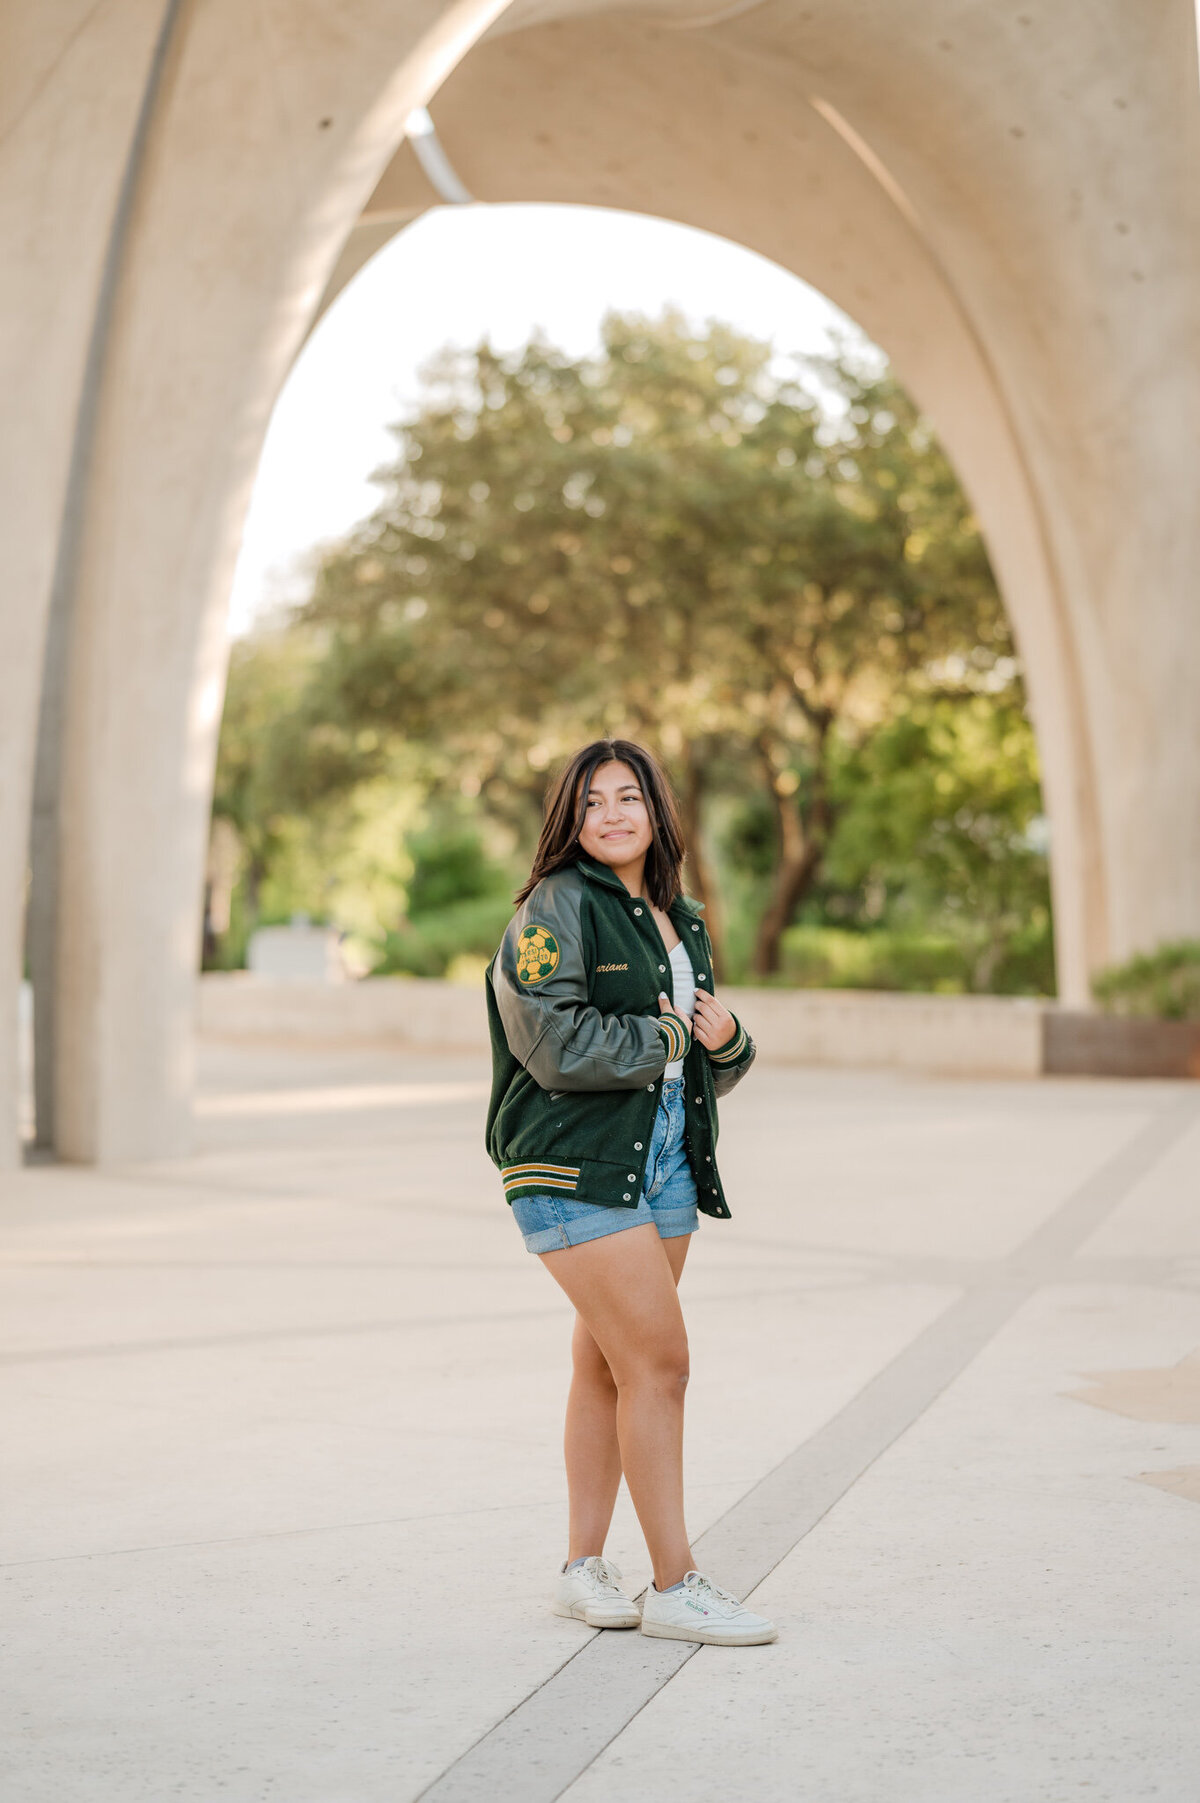 Senior poses in her letterman jacket at San Antonio's Confluence Park.